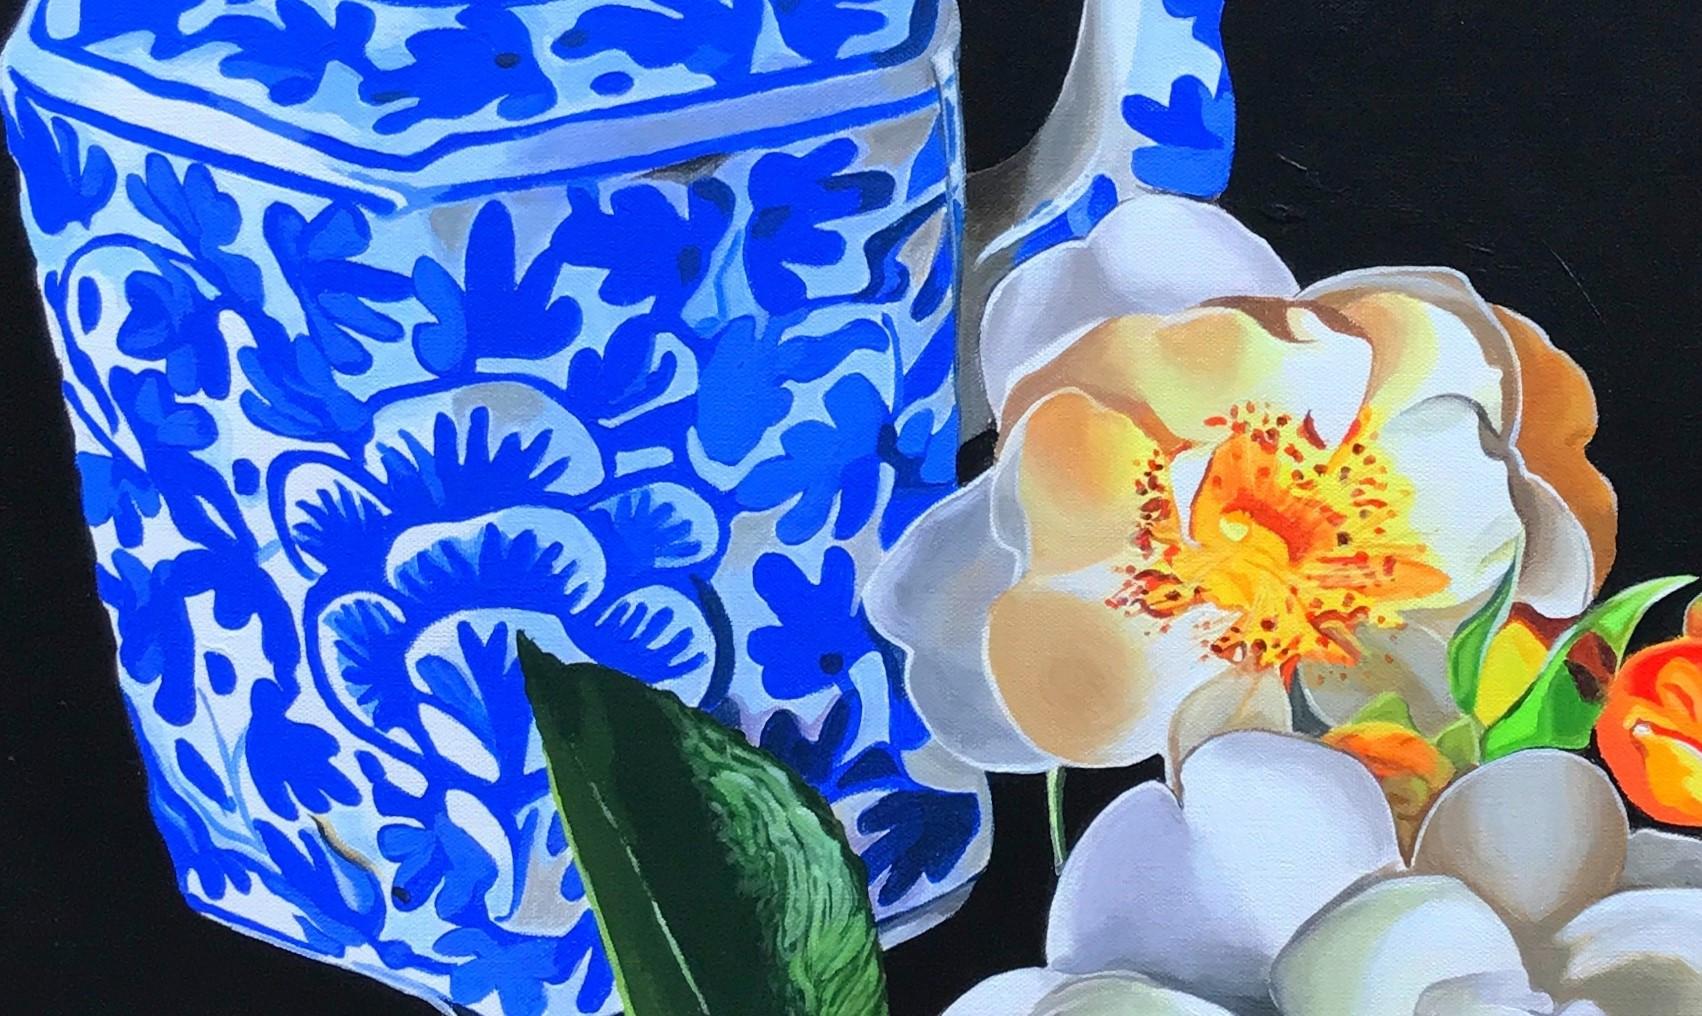 <p>Artist Comments<br>Artist John Jaster paints a realistic still life of a teapot and flowers. White roses blossom, some with open petals and some still in their colorful buds. The ornate blue and white ceramic pattern elegantly stands out against